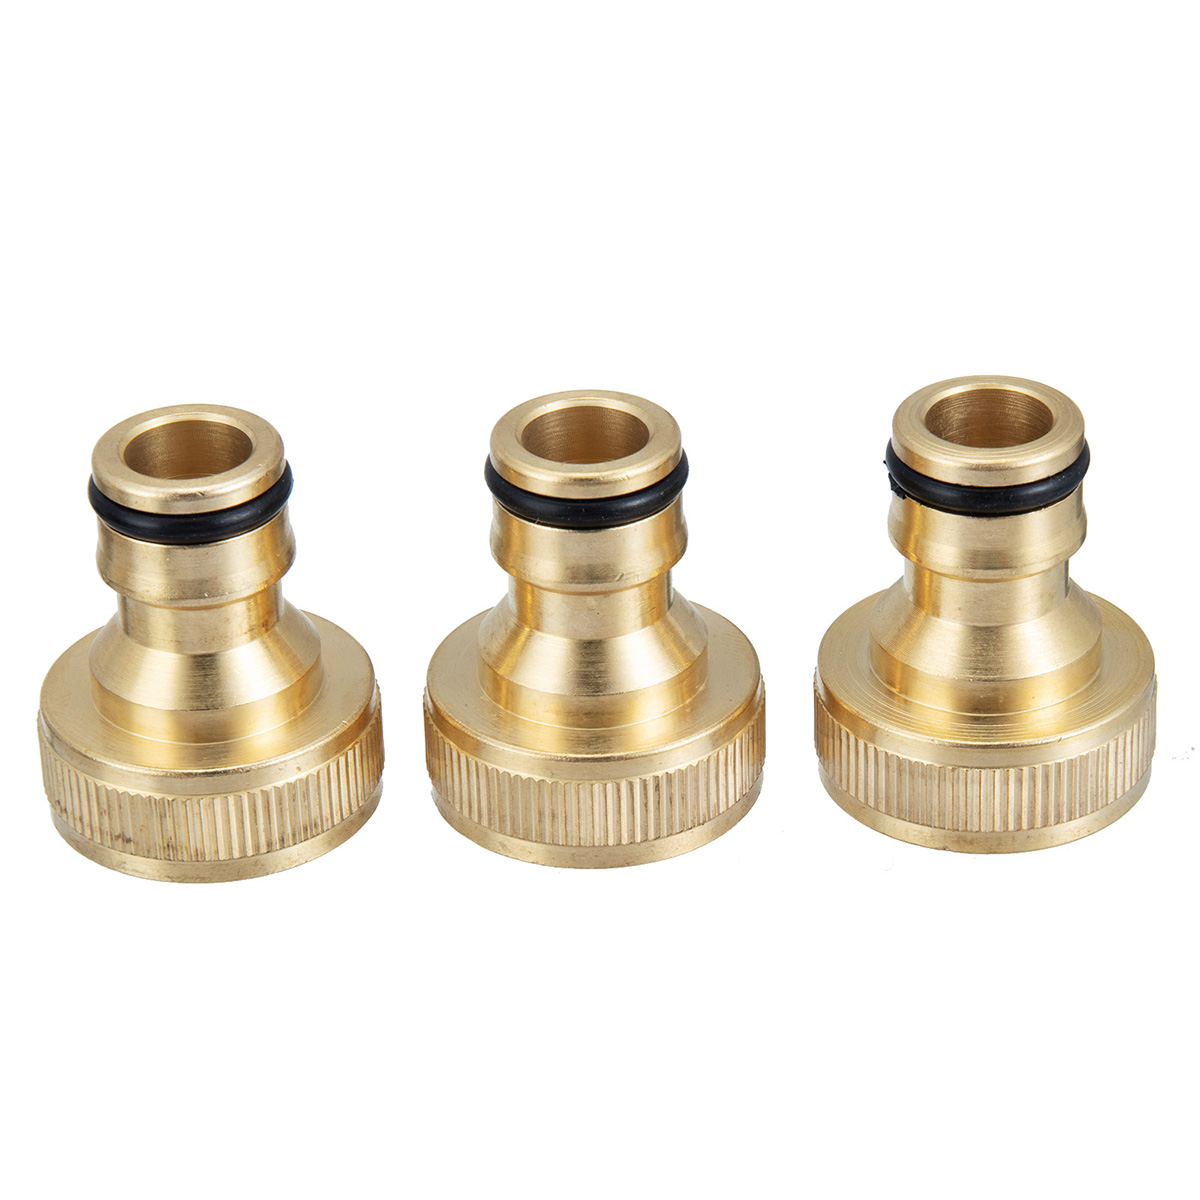 MATCC-Brass-Inner-Teeth-Quick-Connector-Set-34quot-GHT-Brass-Garden-Hose-Quick-Connector-With-Washer-1898352-10